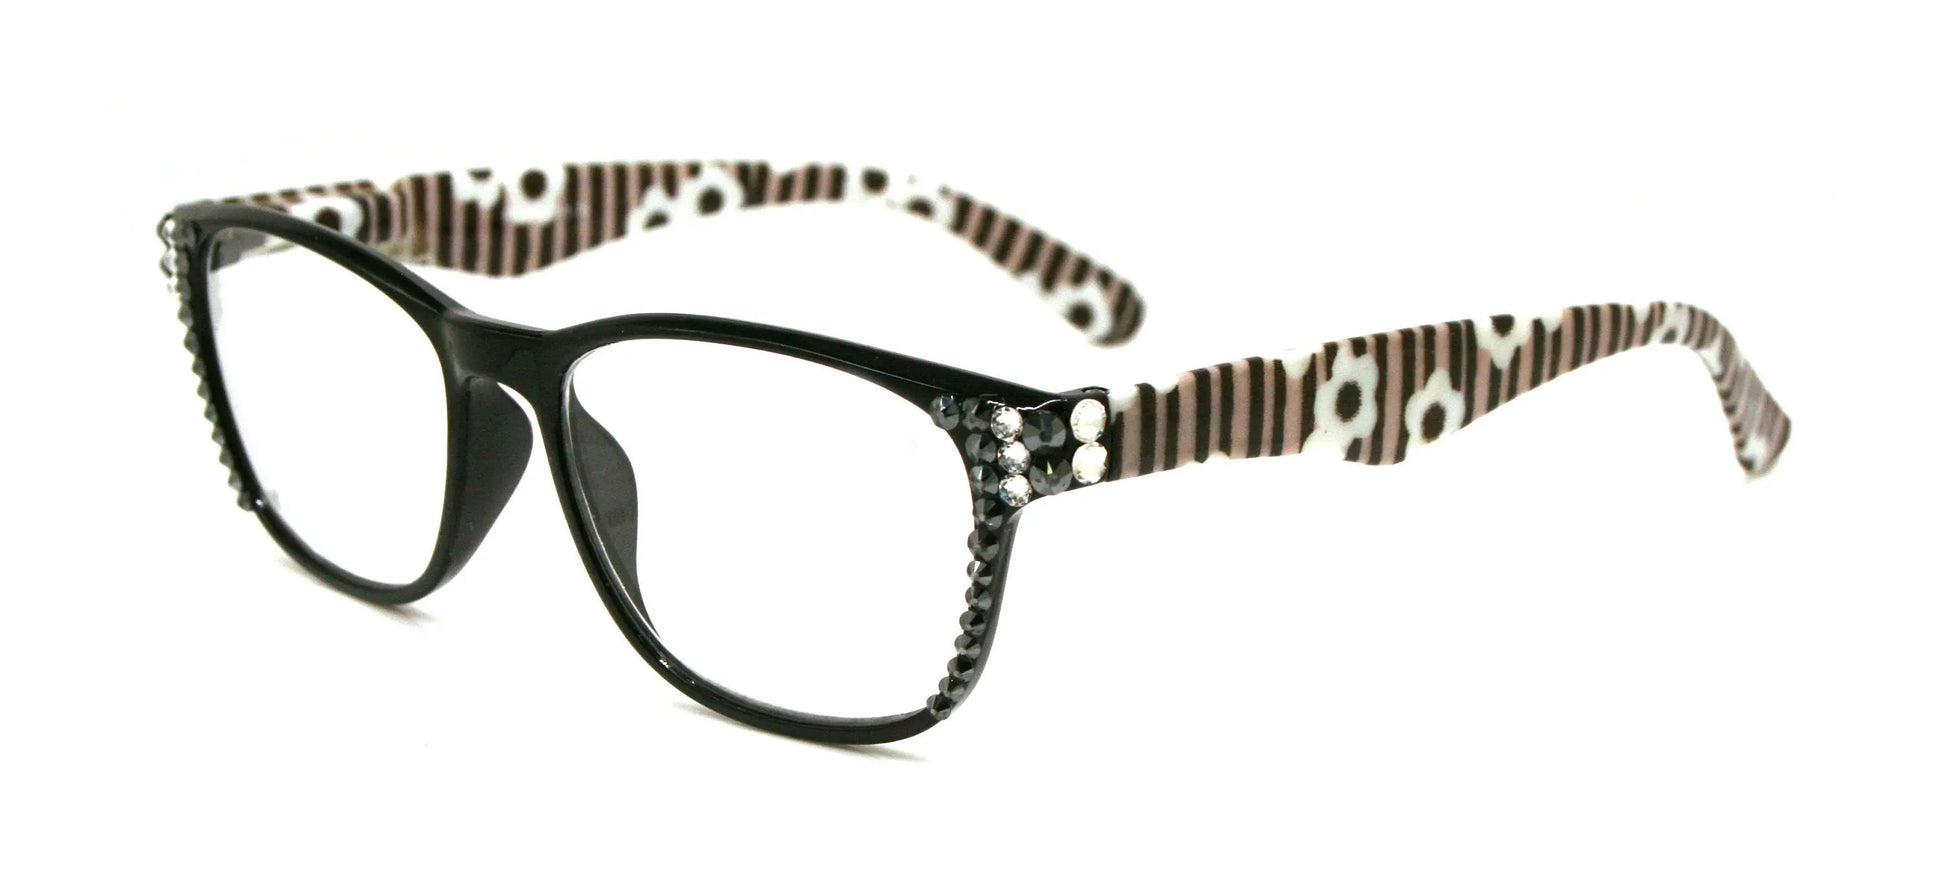 Chelsea, (Bling) Reading Glasses 4 Women W (Hematite, Clear) Genuine European Crystals. +1.25 to +3 (White n Black Floral) NY Fifth Avenue.